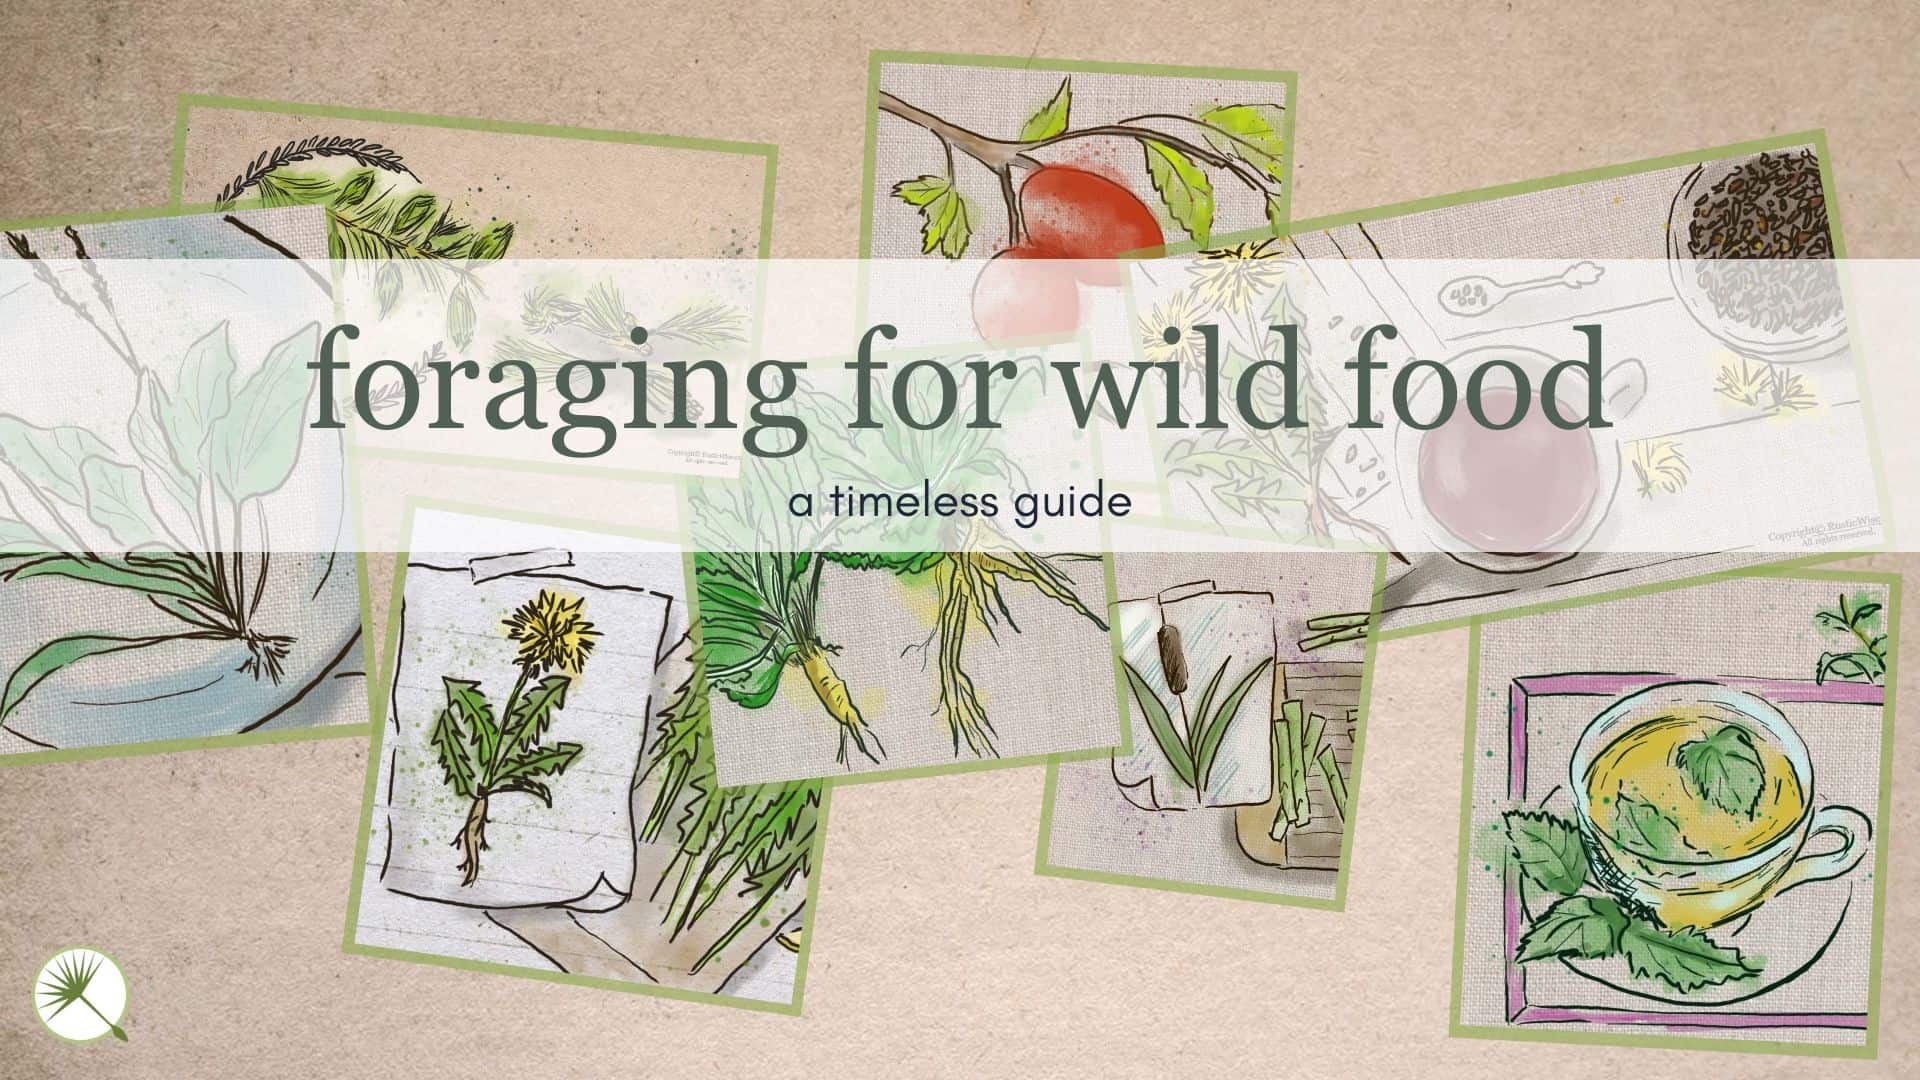 RusticWise.com - Foraging For Wild Food